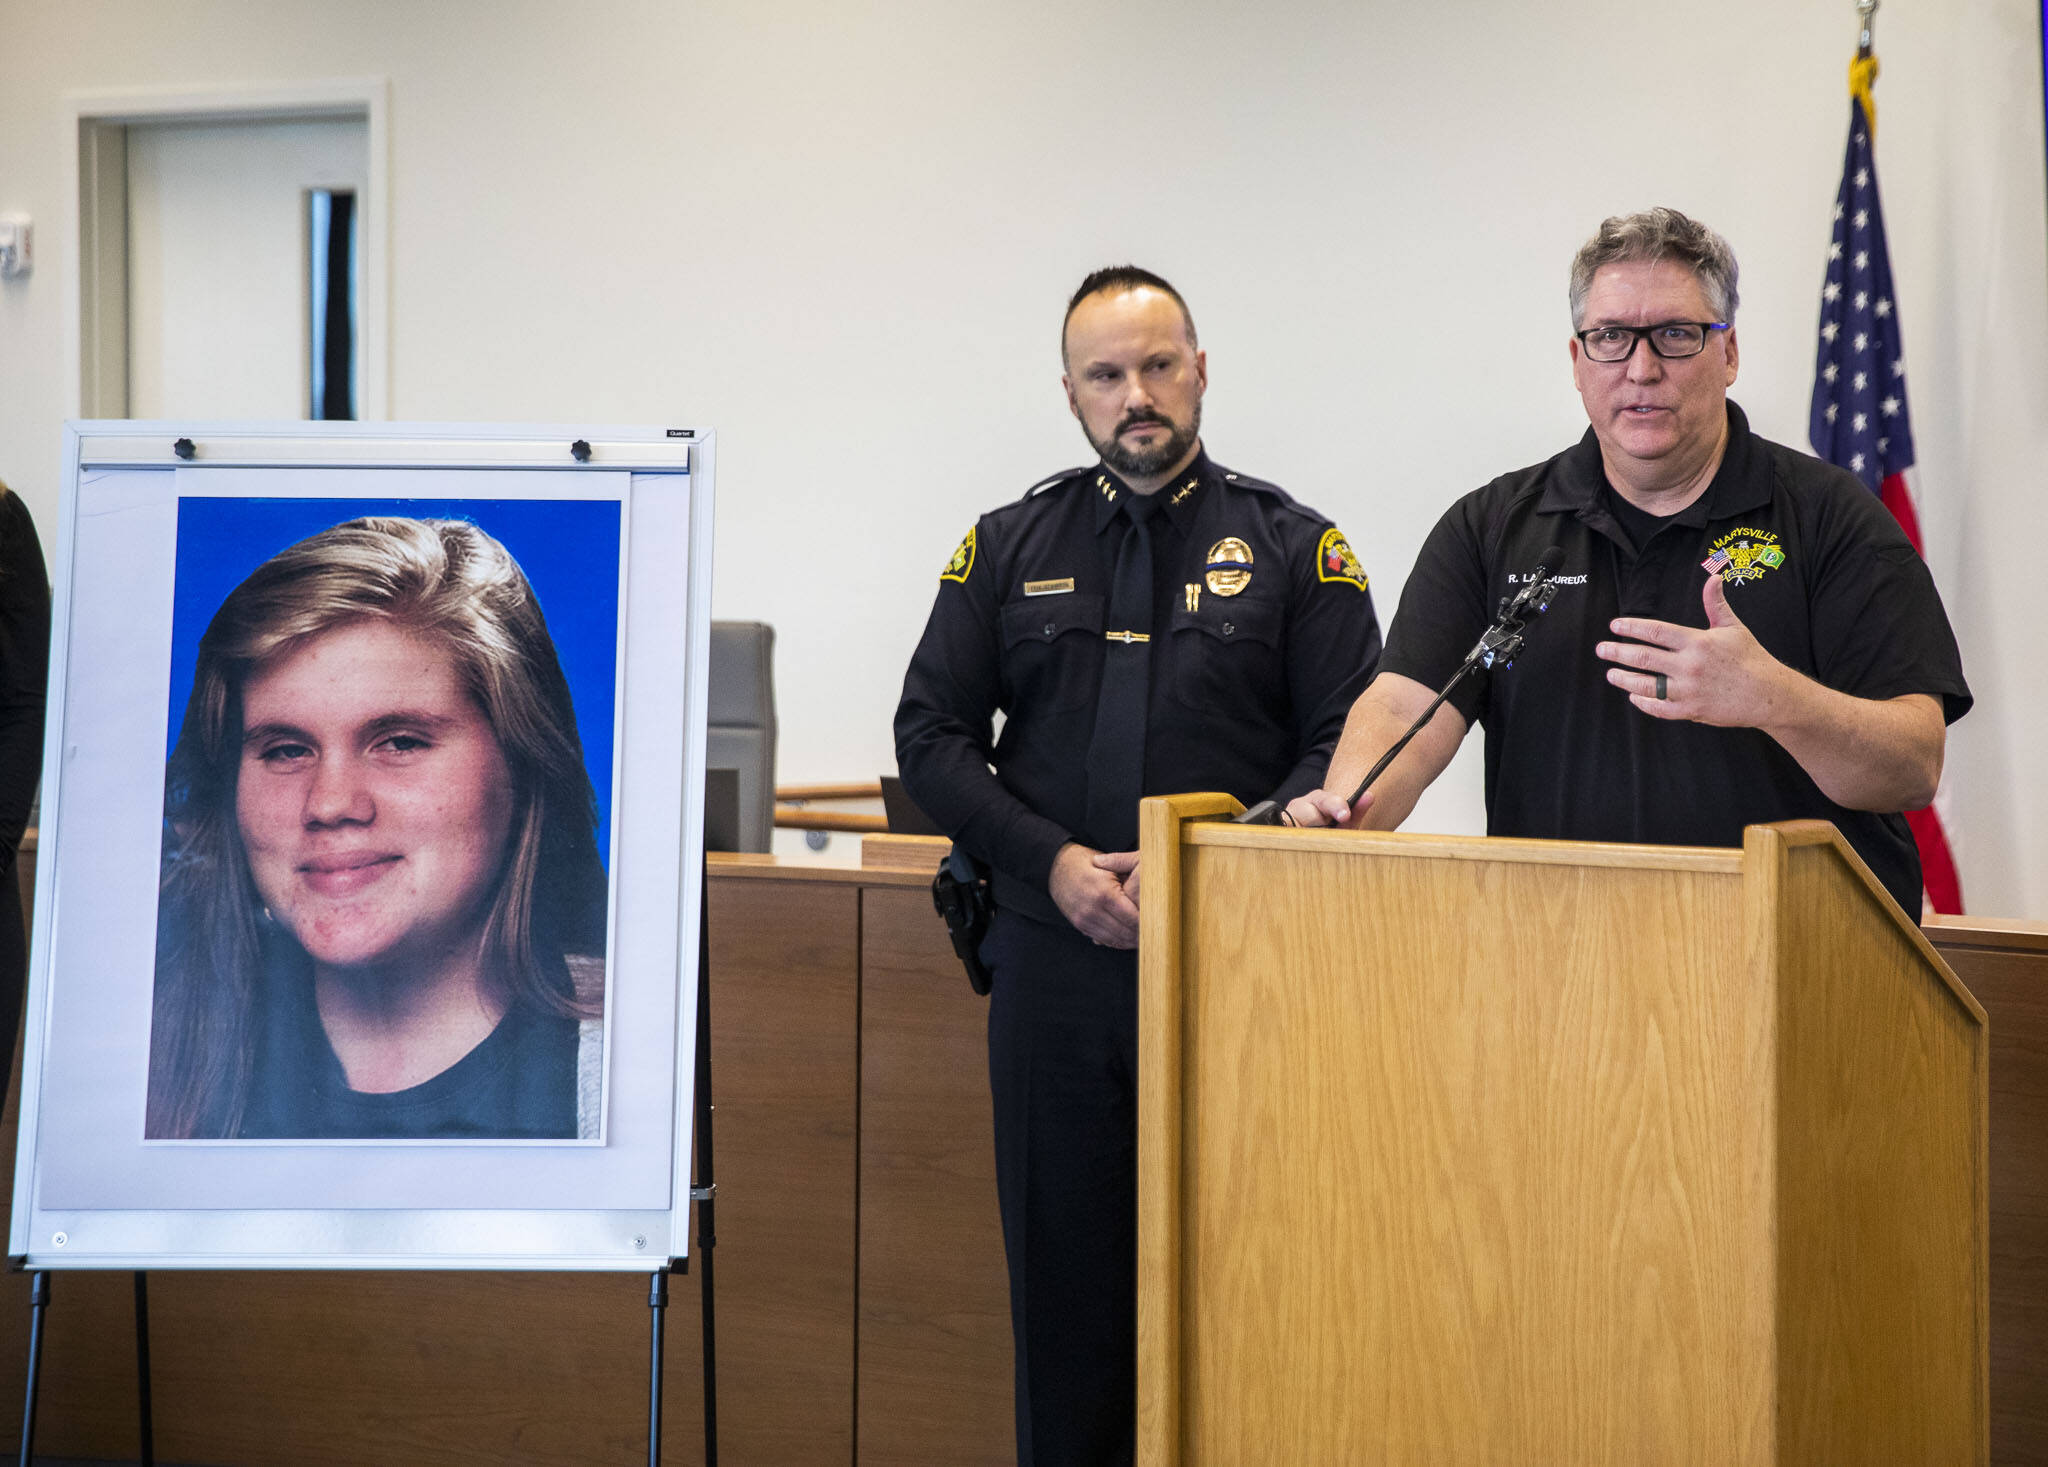 Commander Rob Lamoureux speaks about his experience working on Jennifer Brinkman homicide case on Tuesday, Nov. 29, 2022 in Marysville, Washington. (Olivia Vanni / The Herald)